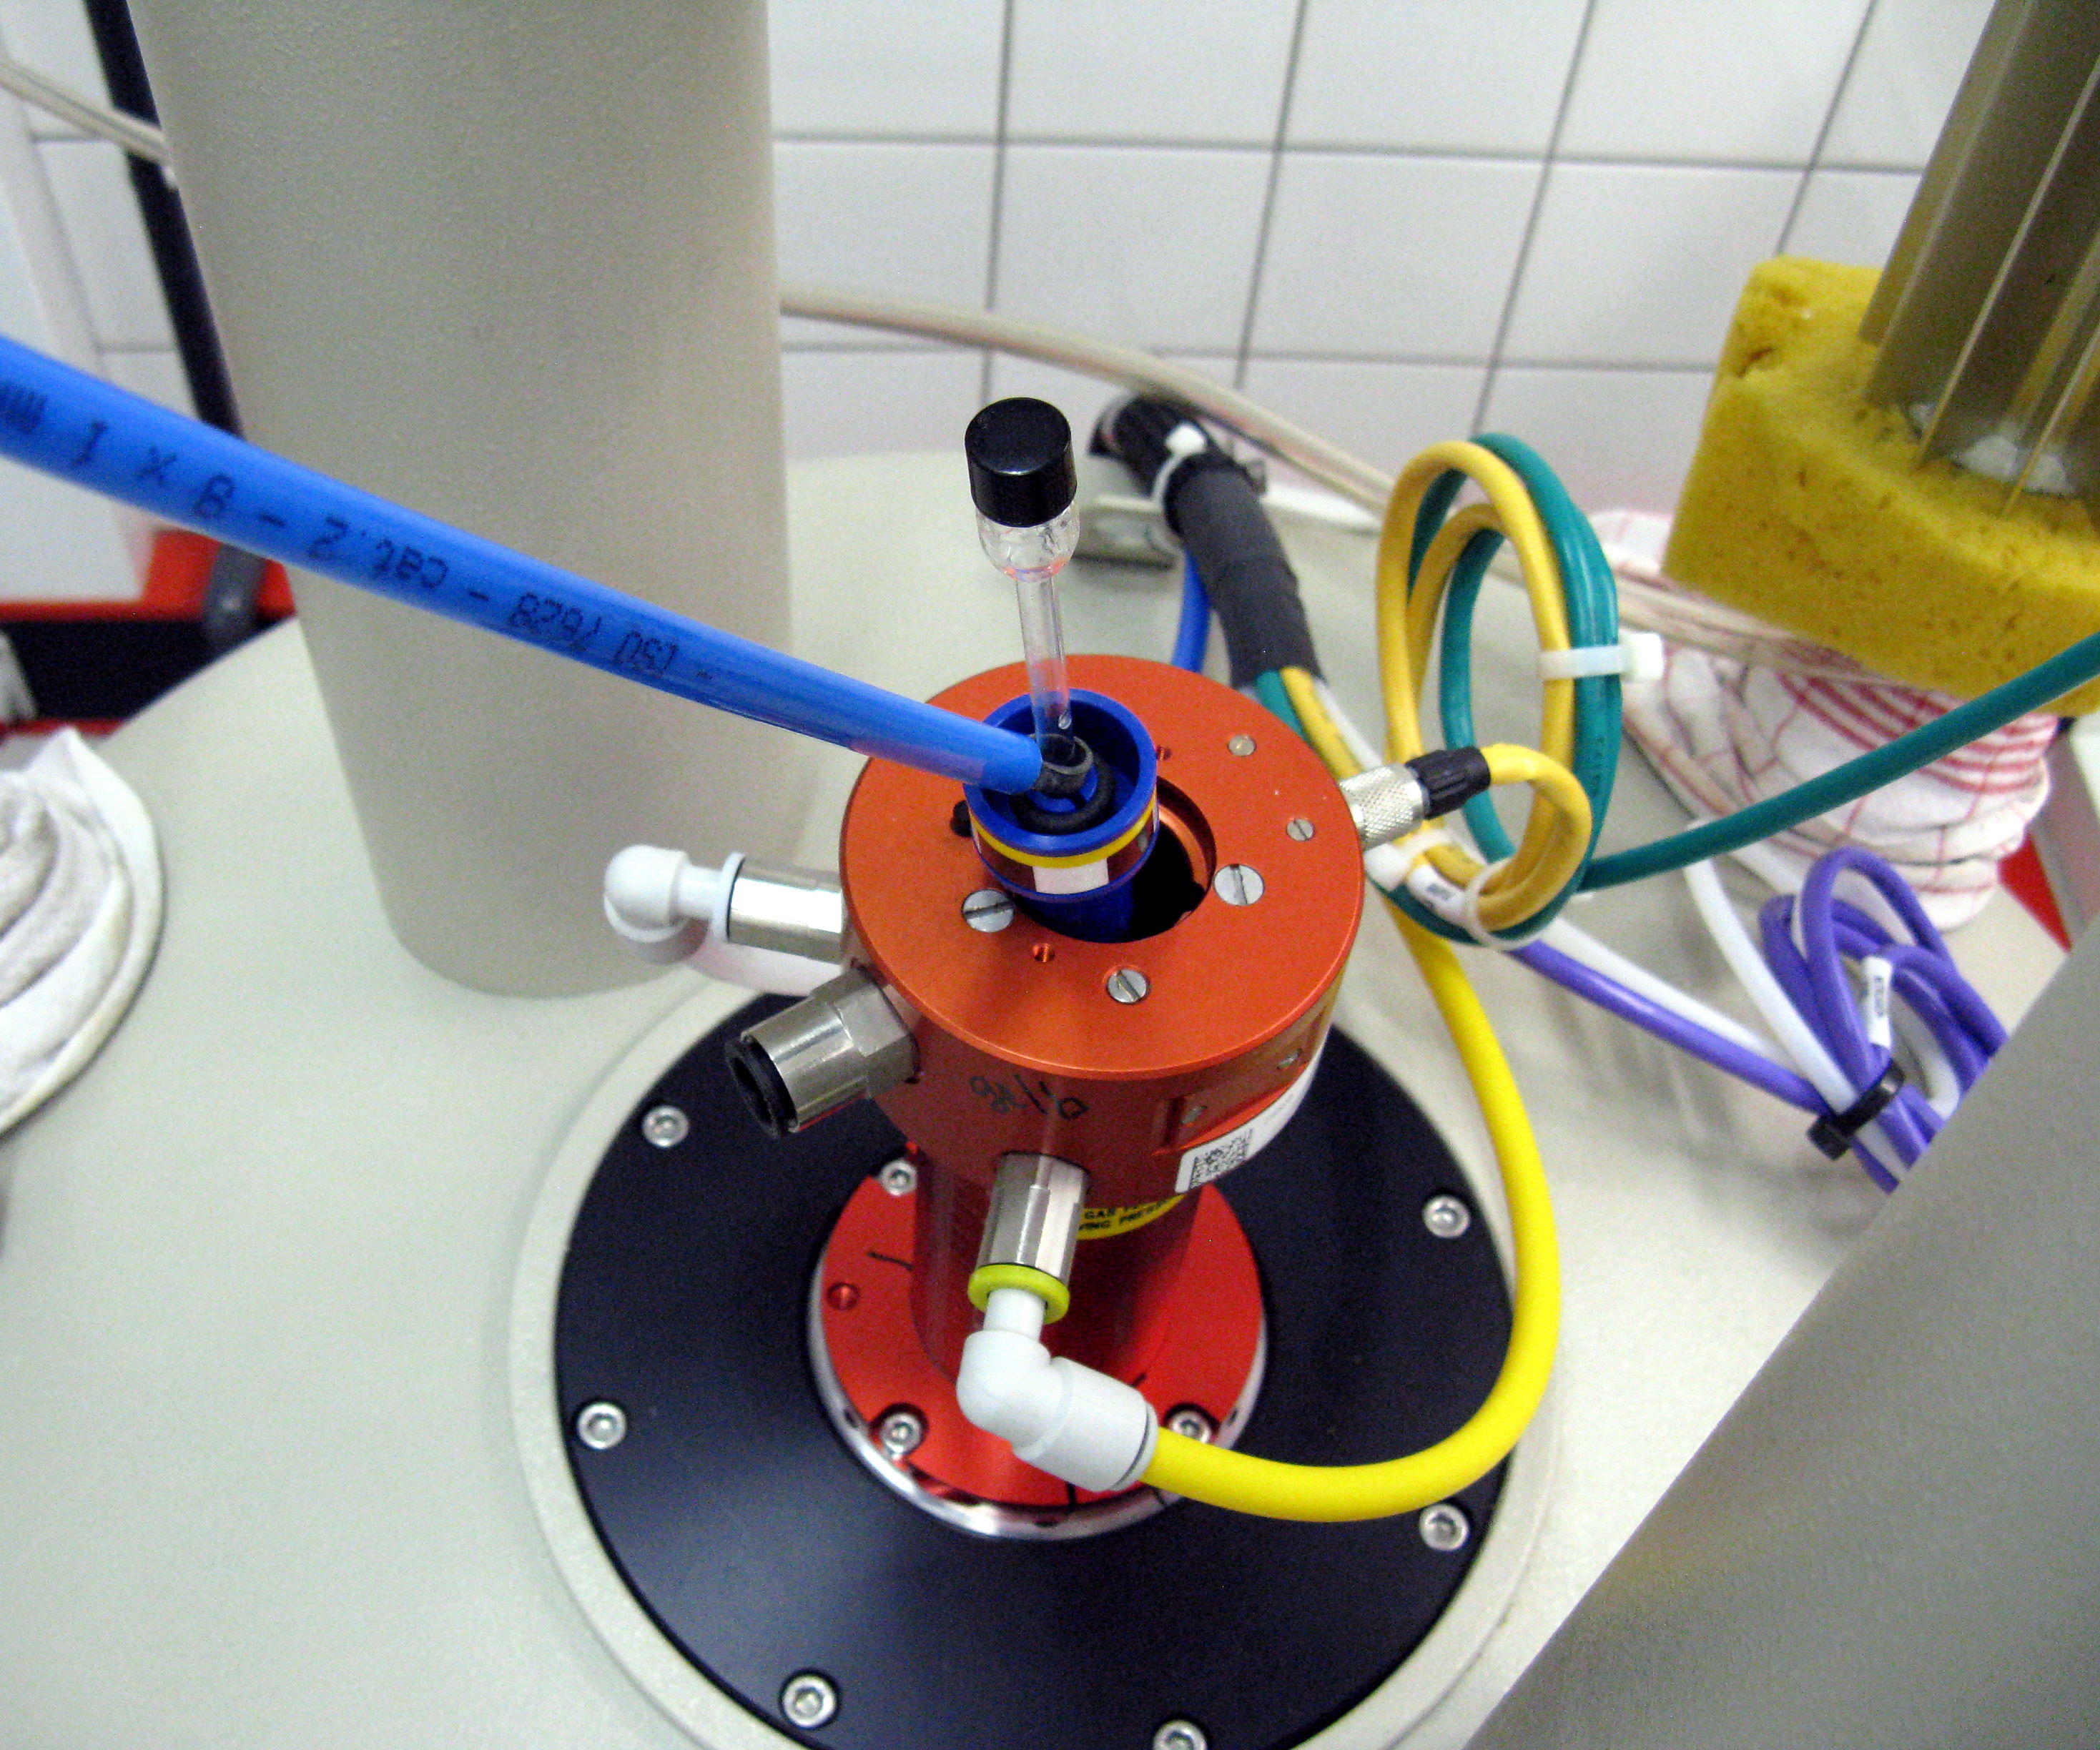 How to Retrieve NMR Samples That Are Stuck Inside the Magnet.